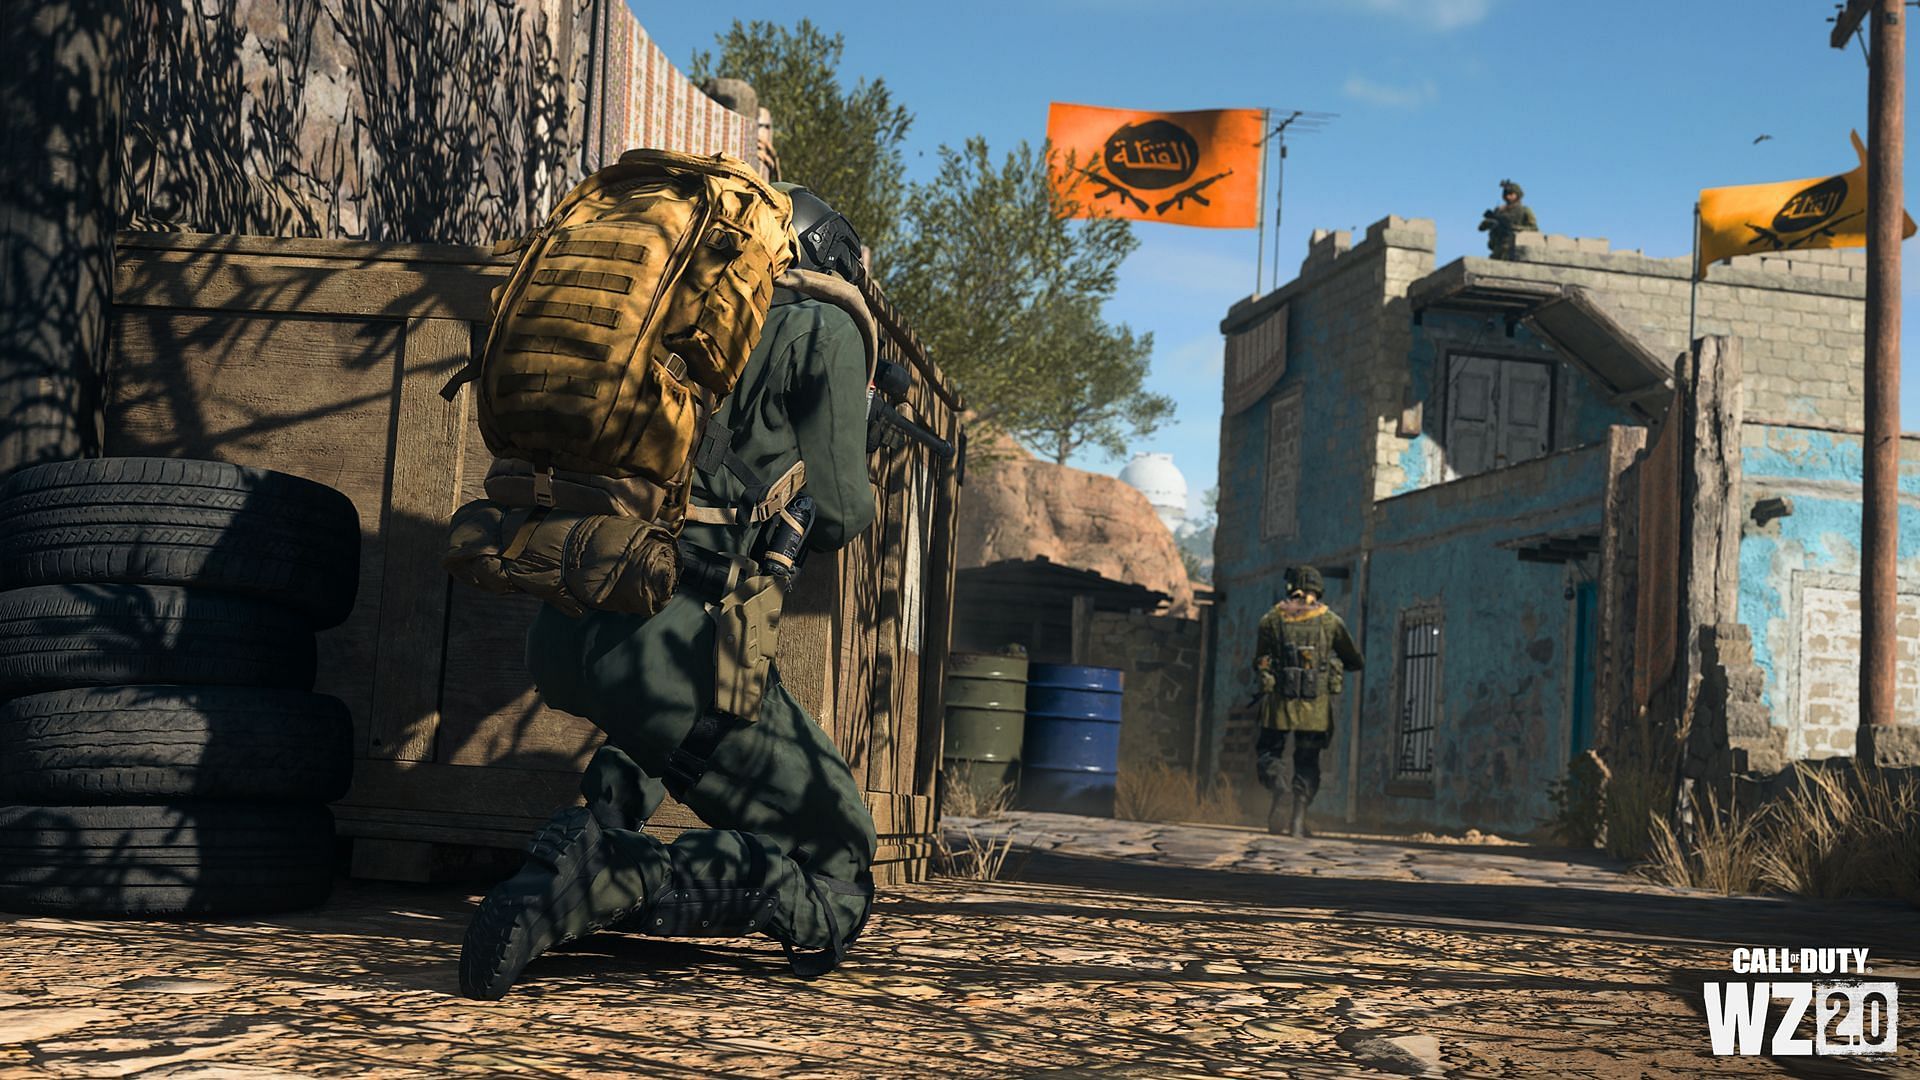 Stronghold in Warzone 2 (Image via Activision)